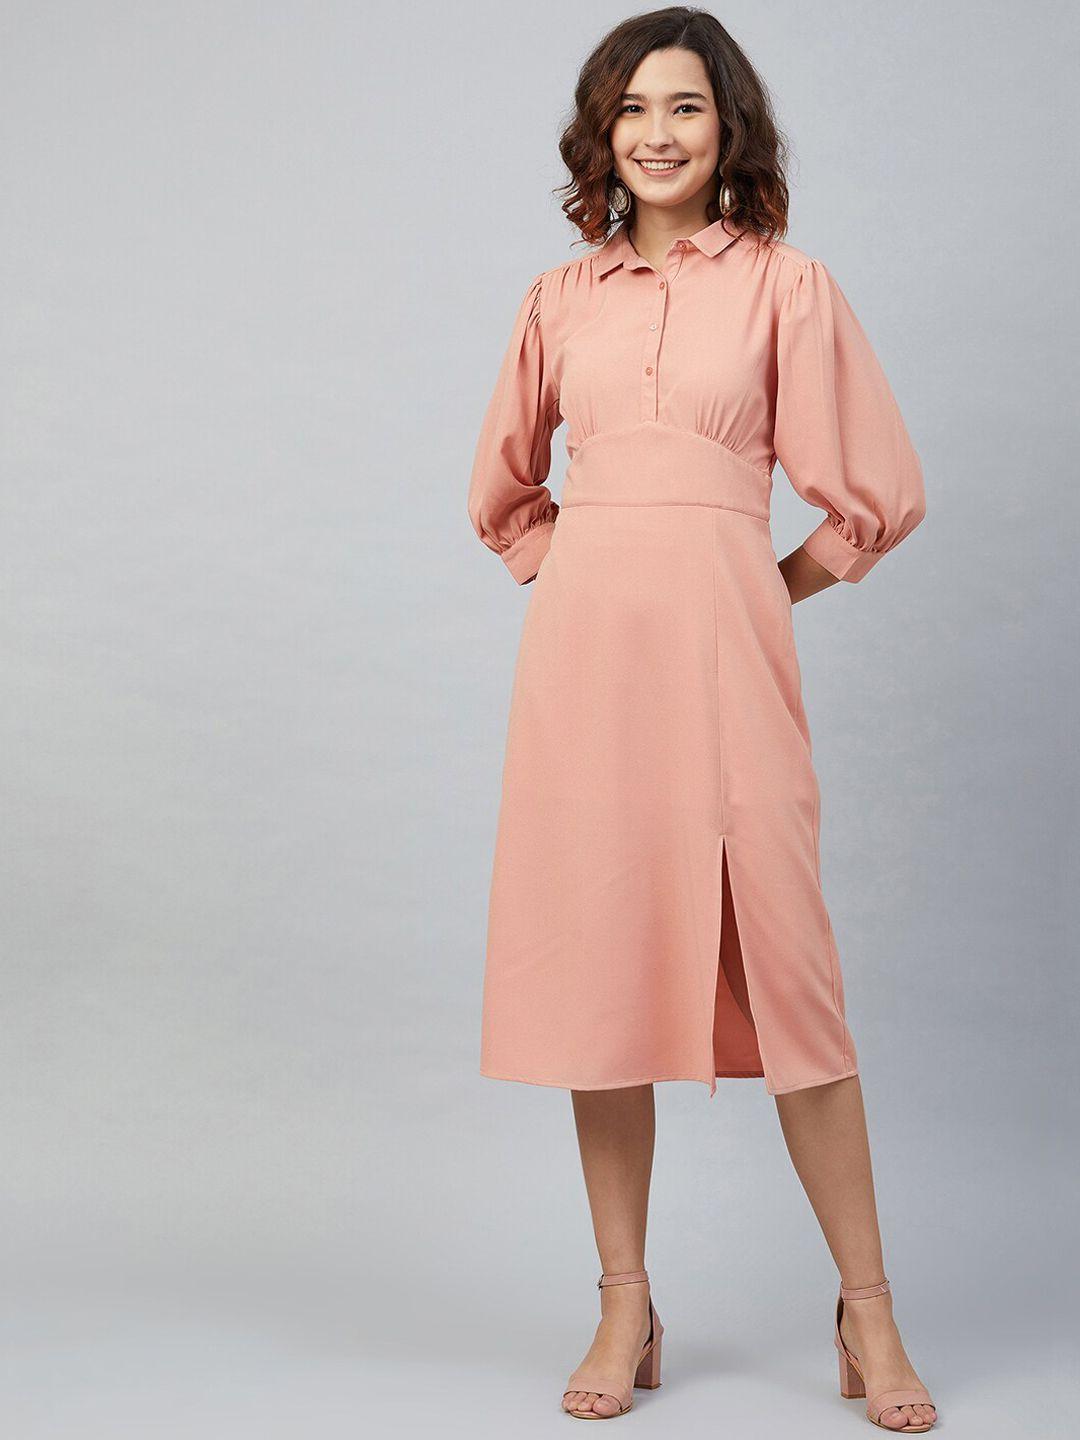 marie claire women peach-coloured solid fit and flare dress